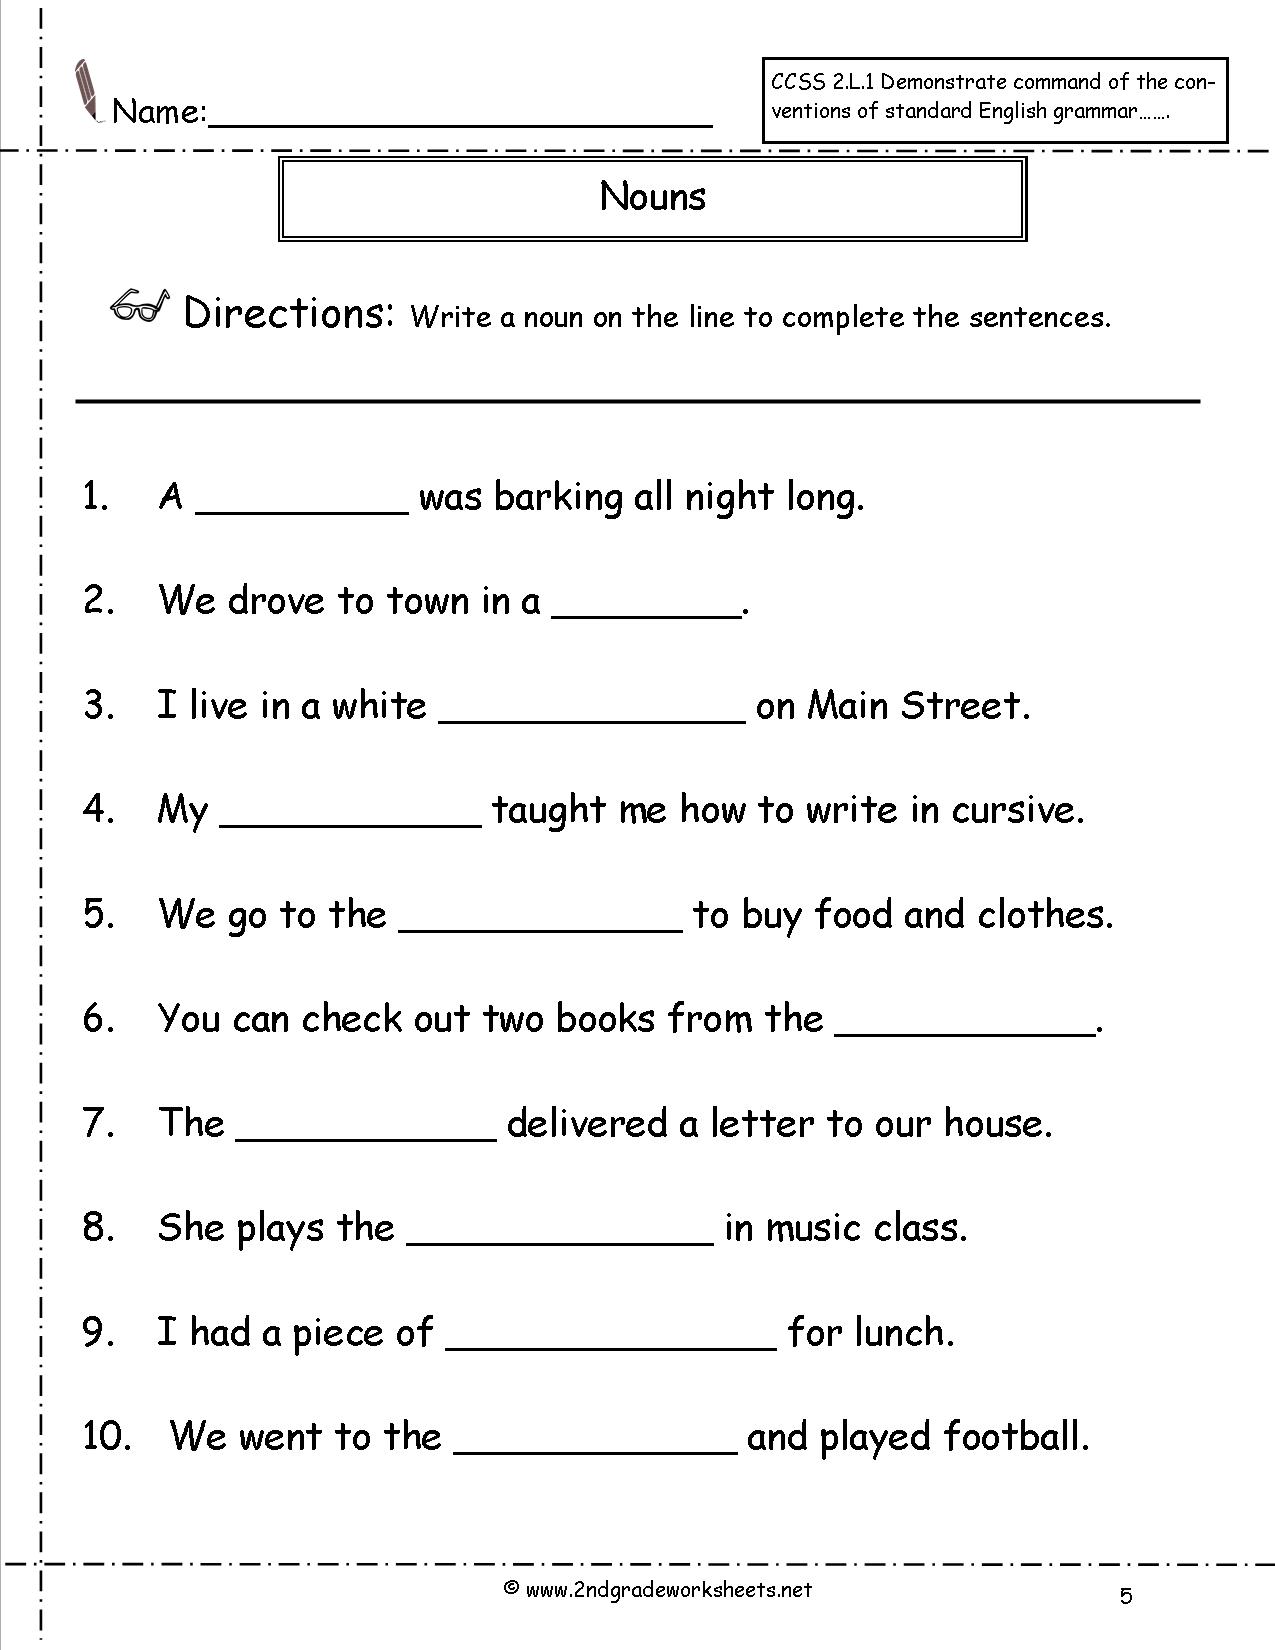 20-best-images-of-abbreviations-worksheets-7th-grade-month-abbreviations-worksheets-states